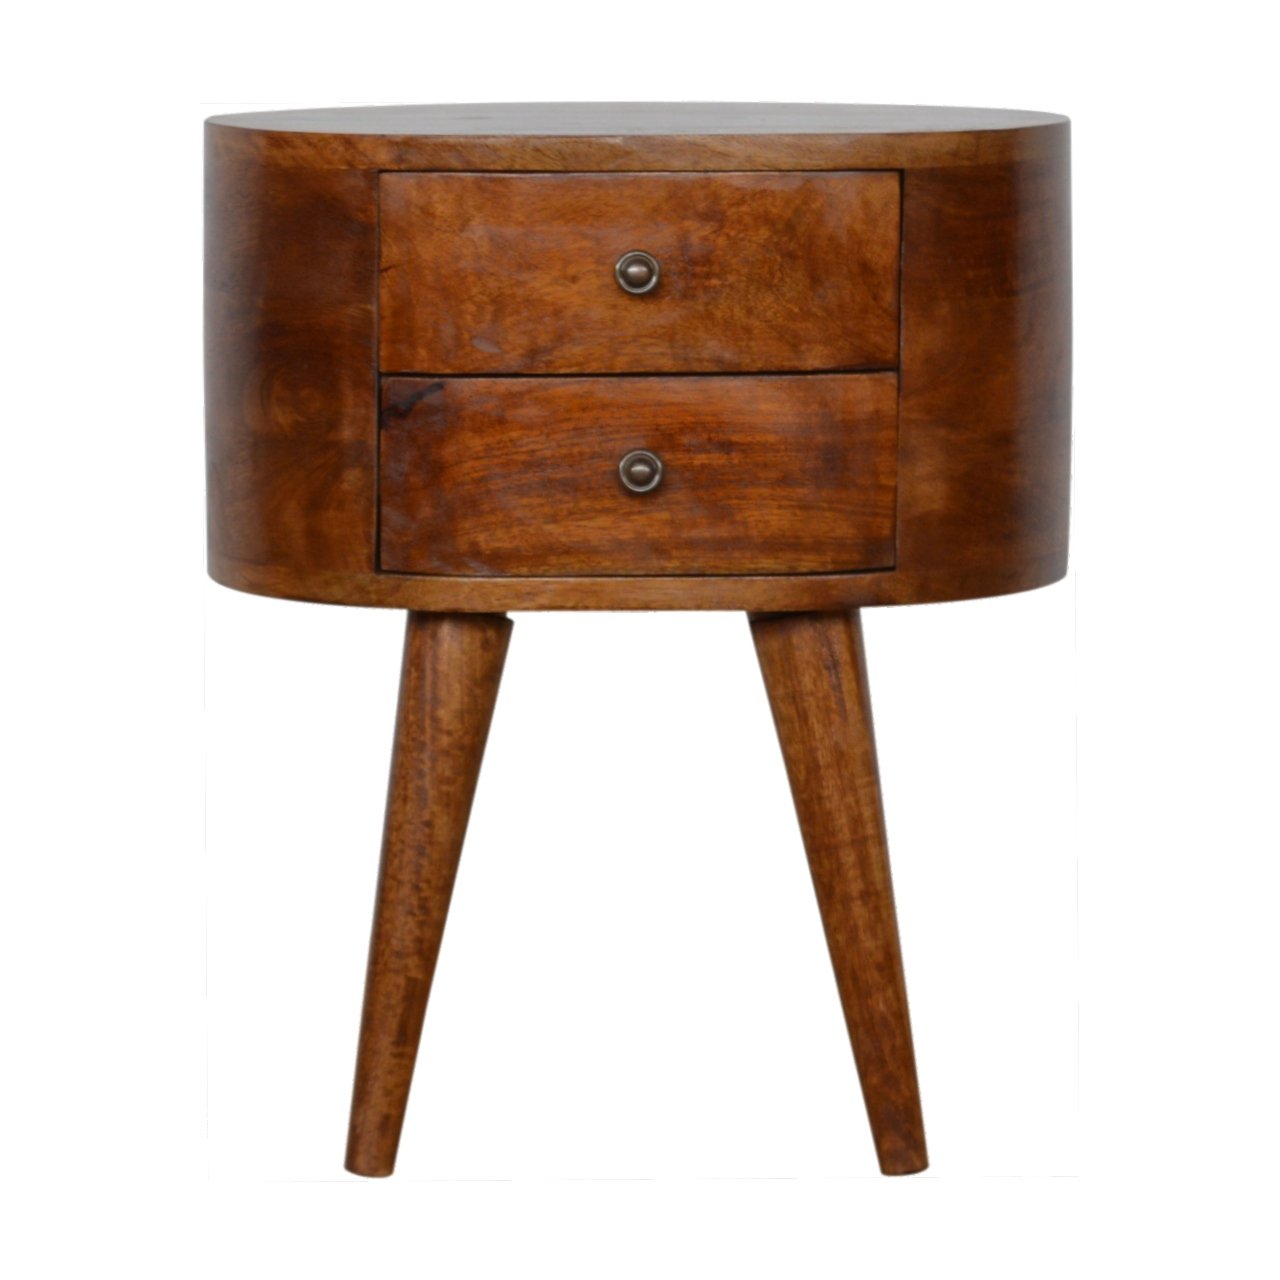 View Chestnut Rounded Bedside Table information